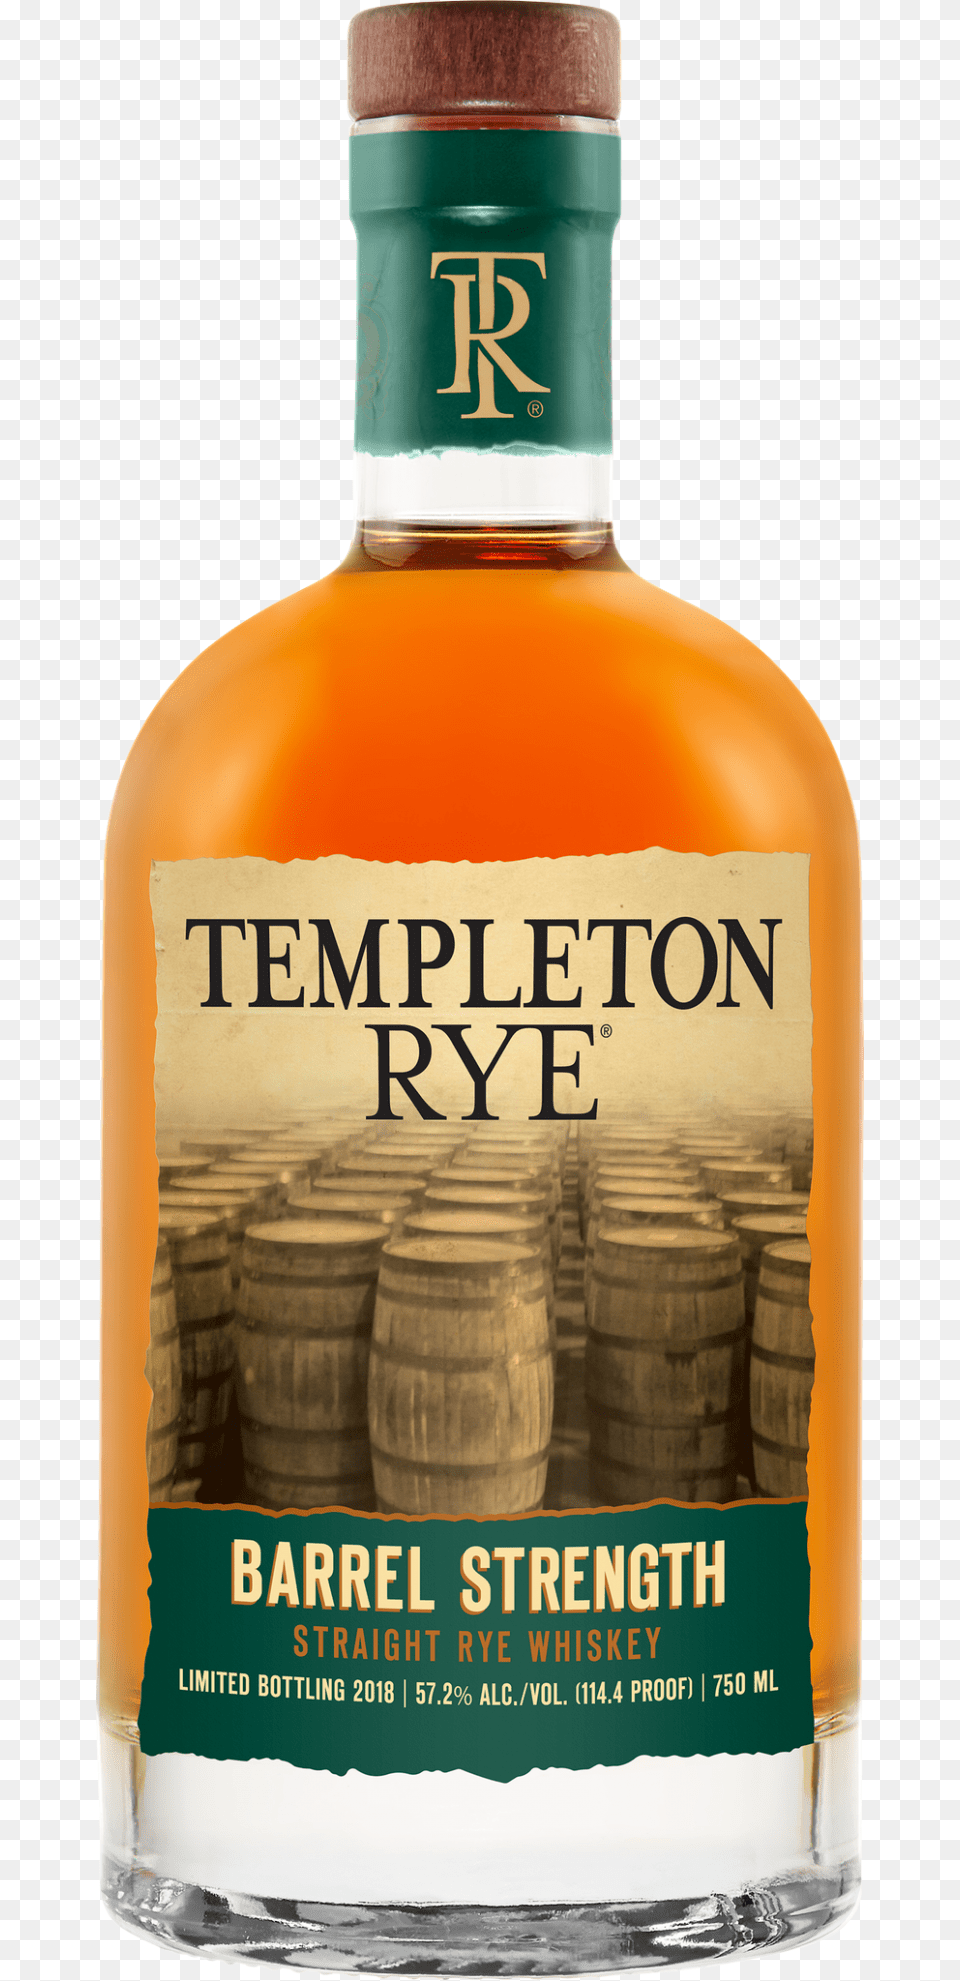 That Artful Use Of Selective Truth Is Grandly On Display Templeton Rye Barrel Strength, Alcohol, Beverage, Liquor, Whisky Png Image